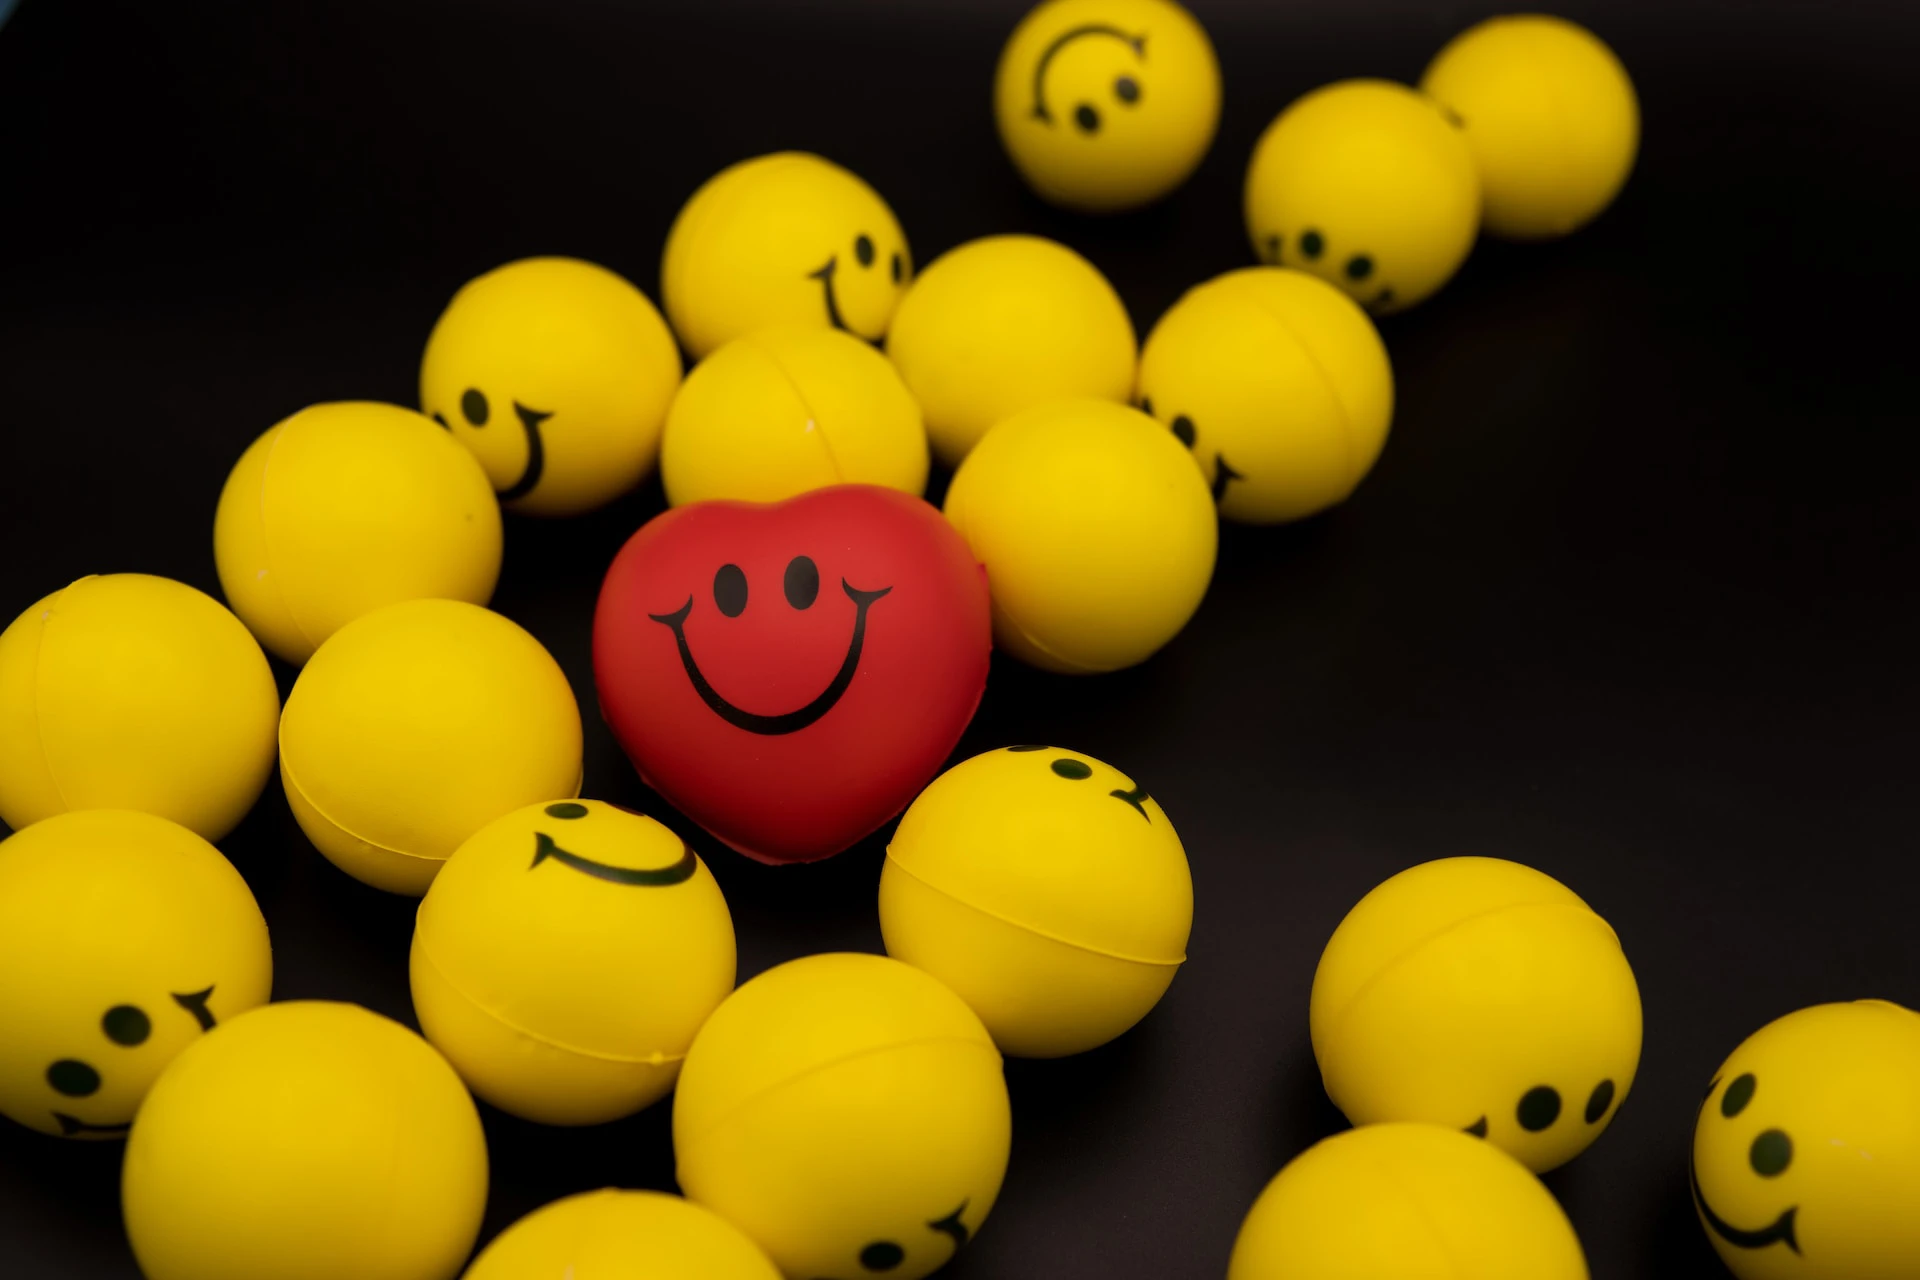 Red heart smiley face ball sitting around yellow smiley face balls